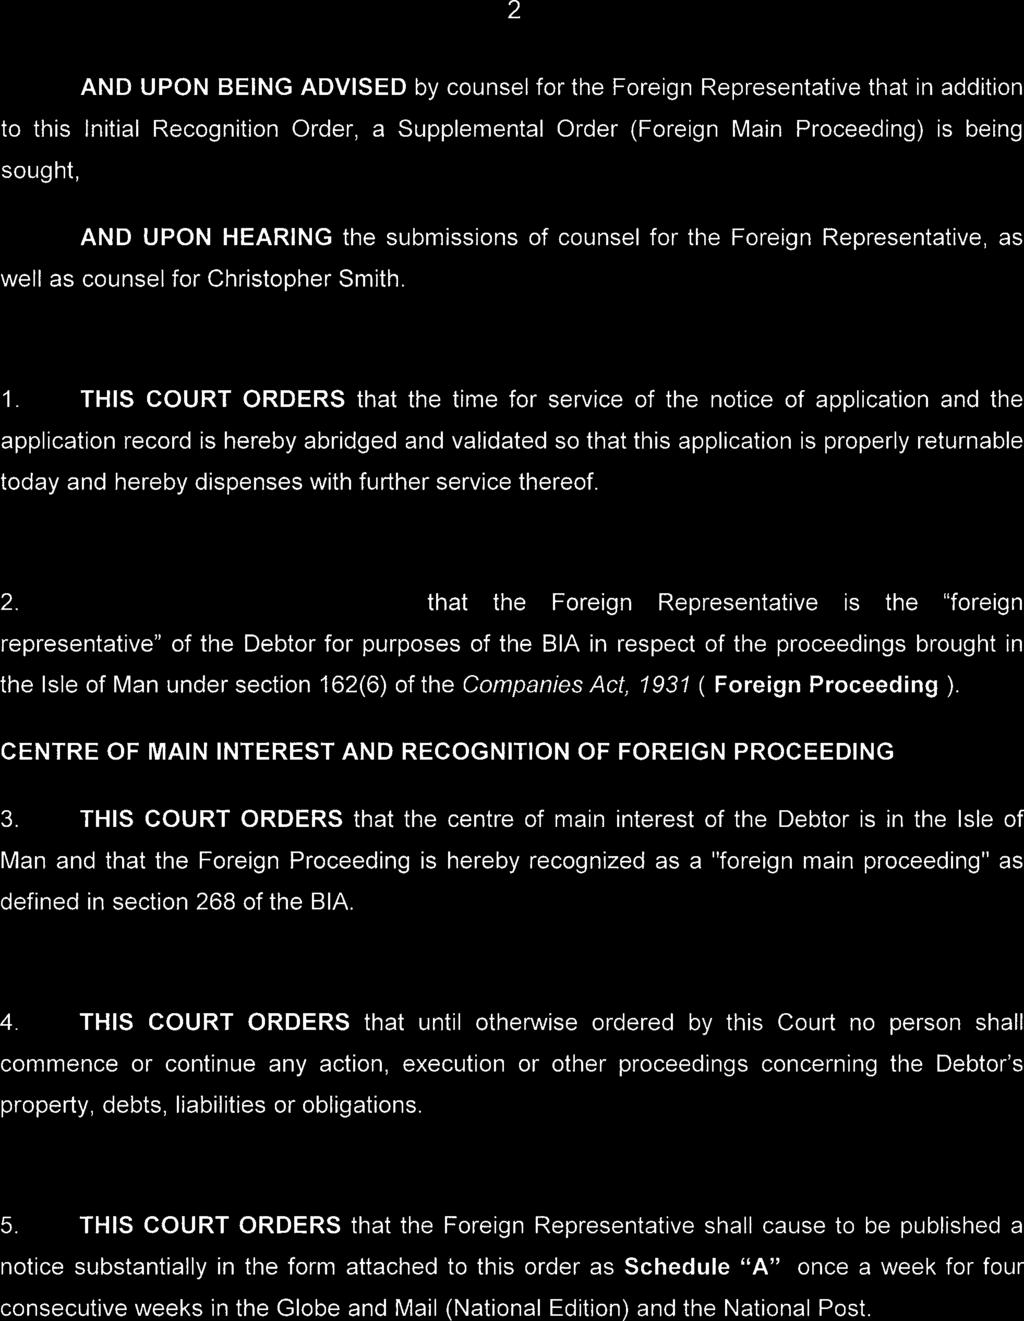 -2 - AND UPON BEING ADVISED by counsel for the Foreign Representative that in addition to this Initial Recognition Order, a Supplemental Order (Foreign Main Proceeding) is being sought, AND UPON